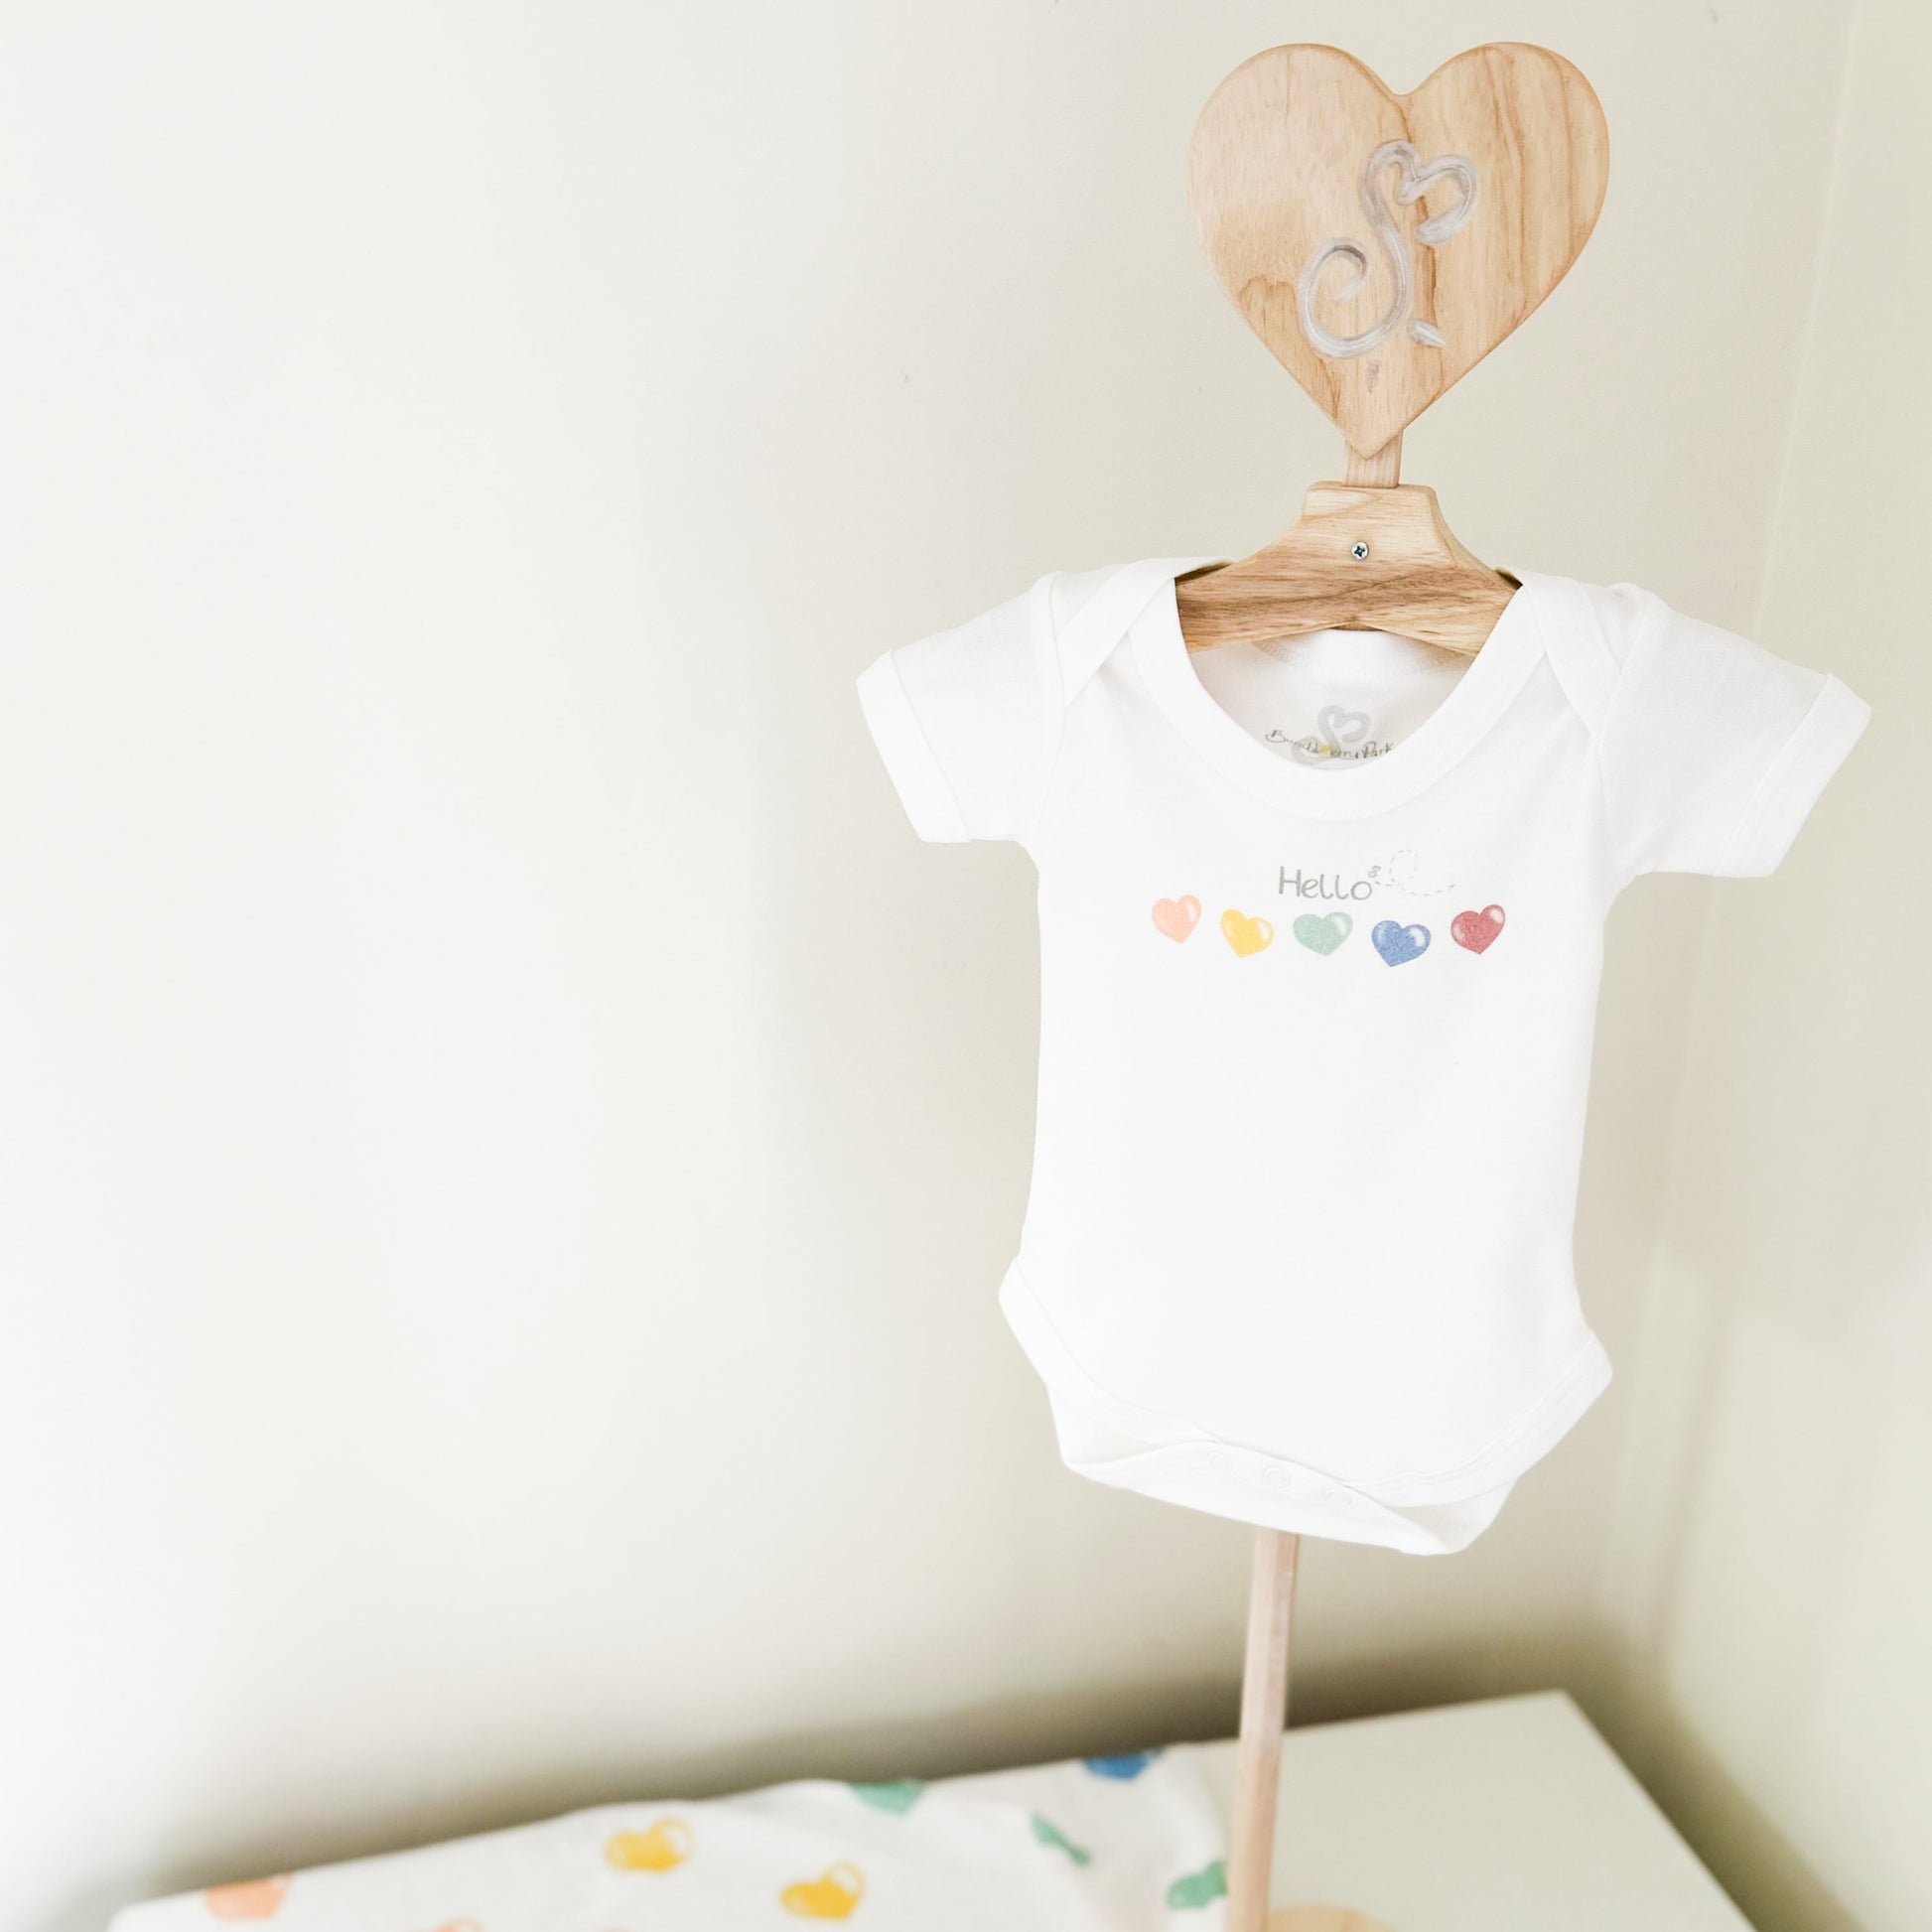 baby clothes stand with a newborn baby vest printed with rainbow coloured love hearts with "hello" quote